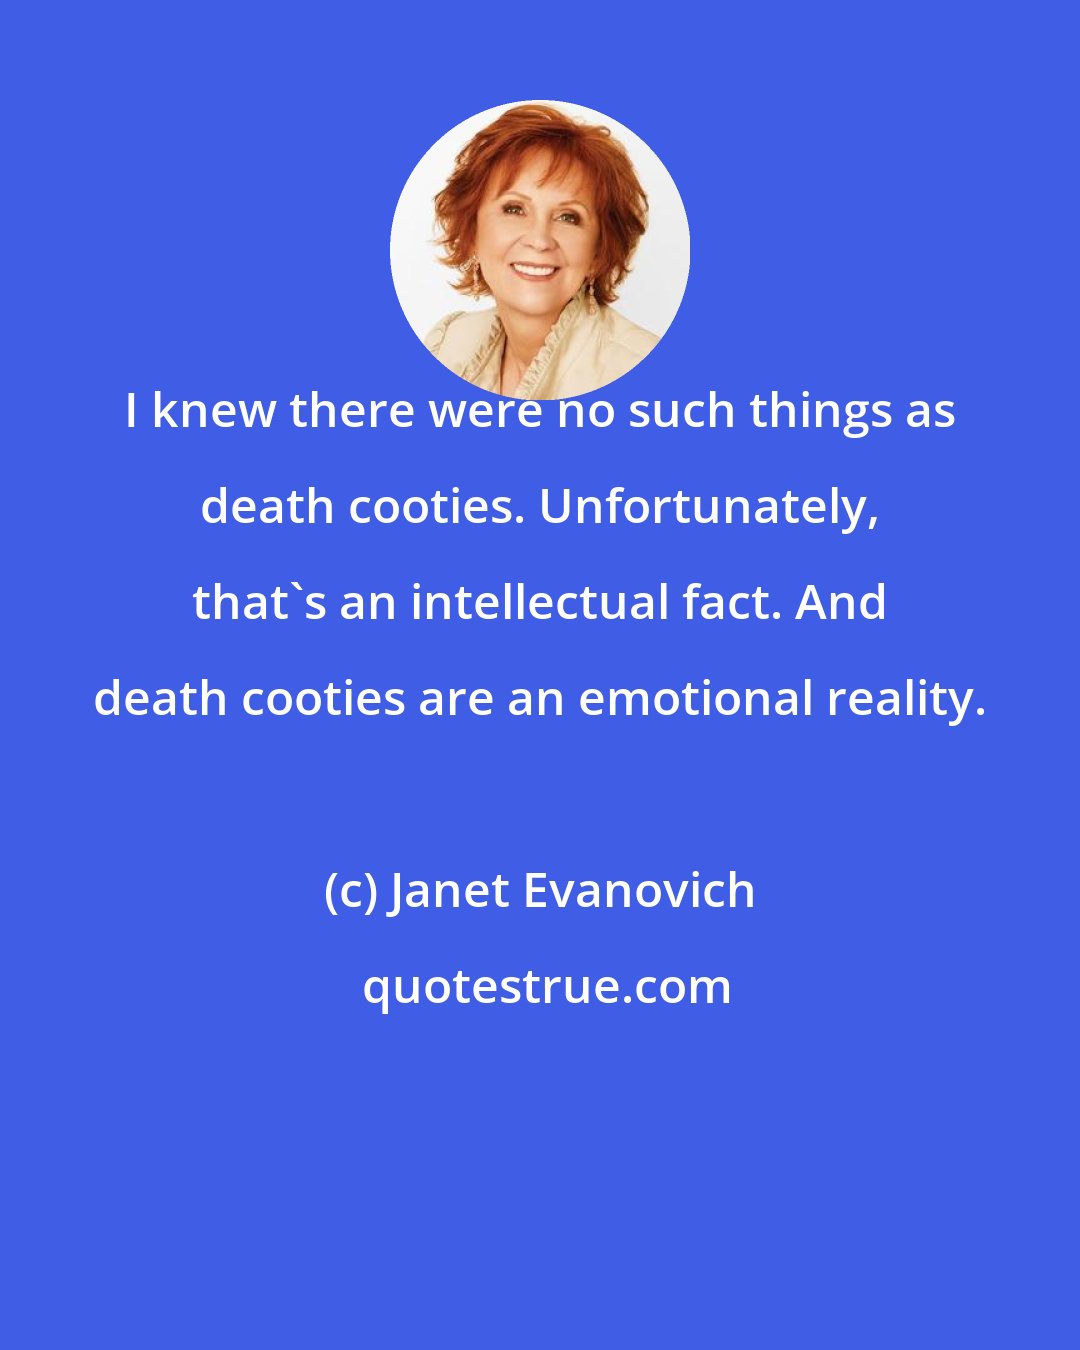 Janet Evanovich: I knew there were no such things as death cooties. Unfortunately, that's an intellectual fact. And death cooties are an emotional reality.